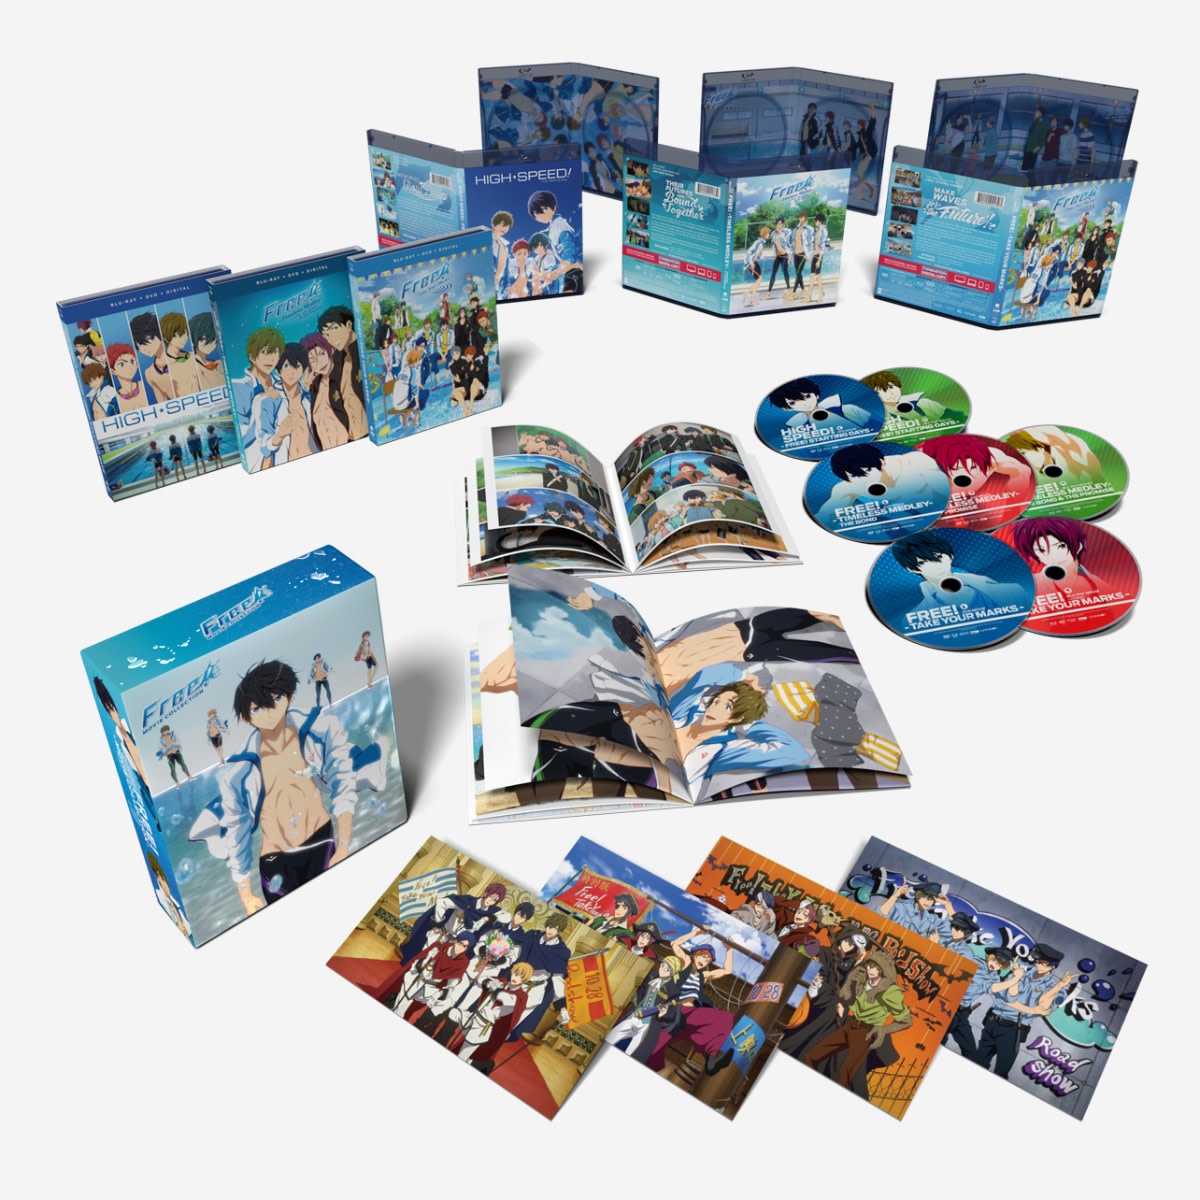 Free Movie Collection Blu Ray Dvd Combo Le Fandom Post Forums